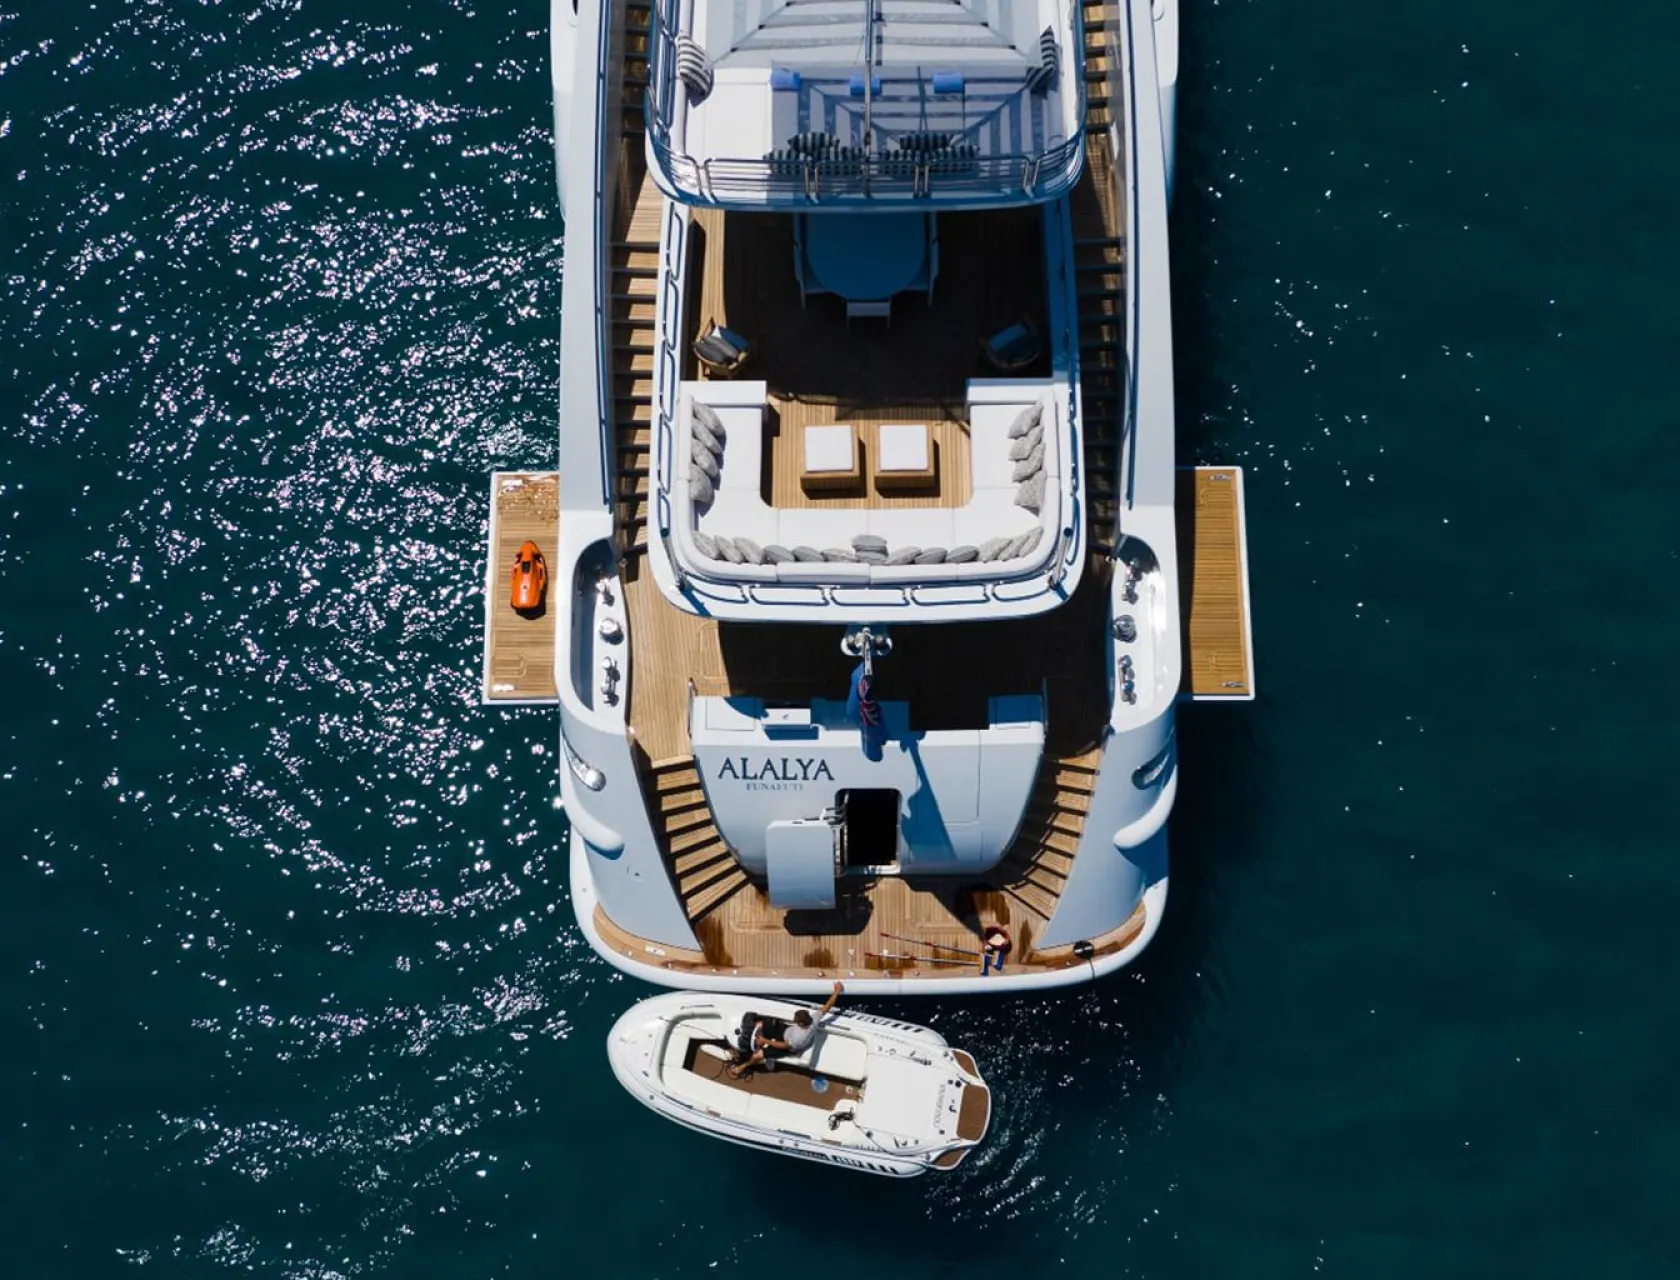 On these yachts you will have a luxury experience